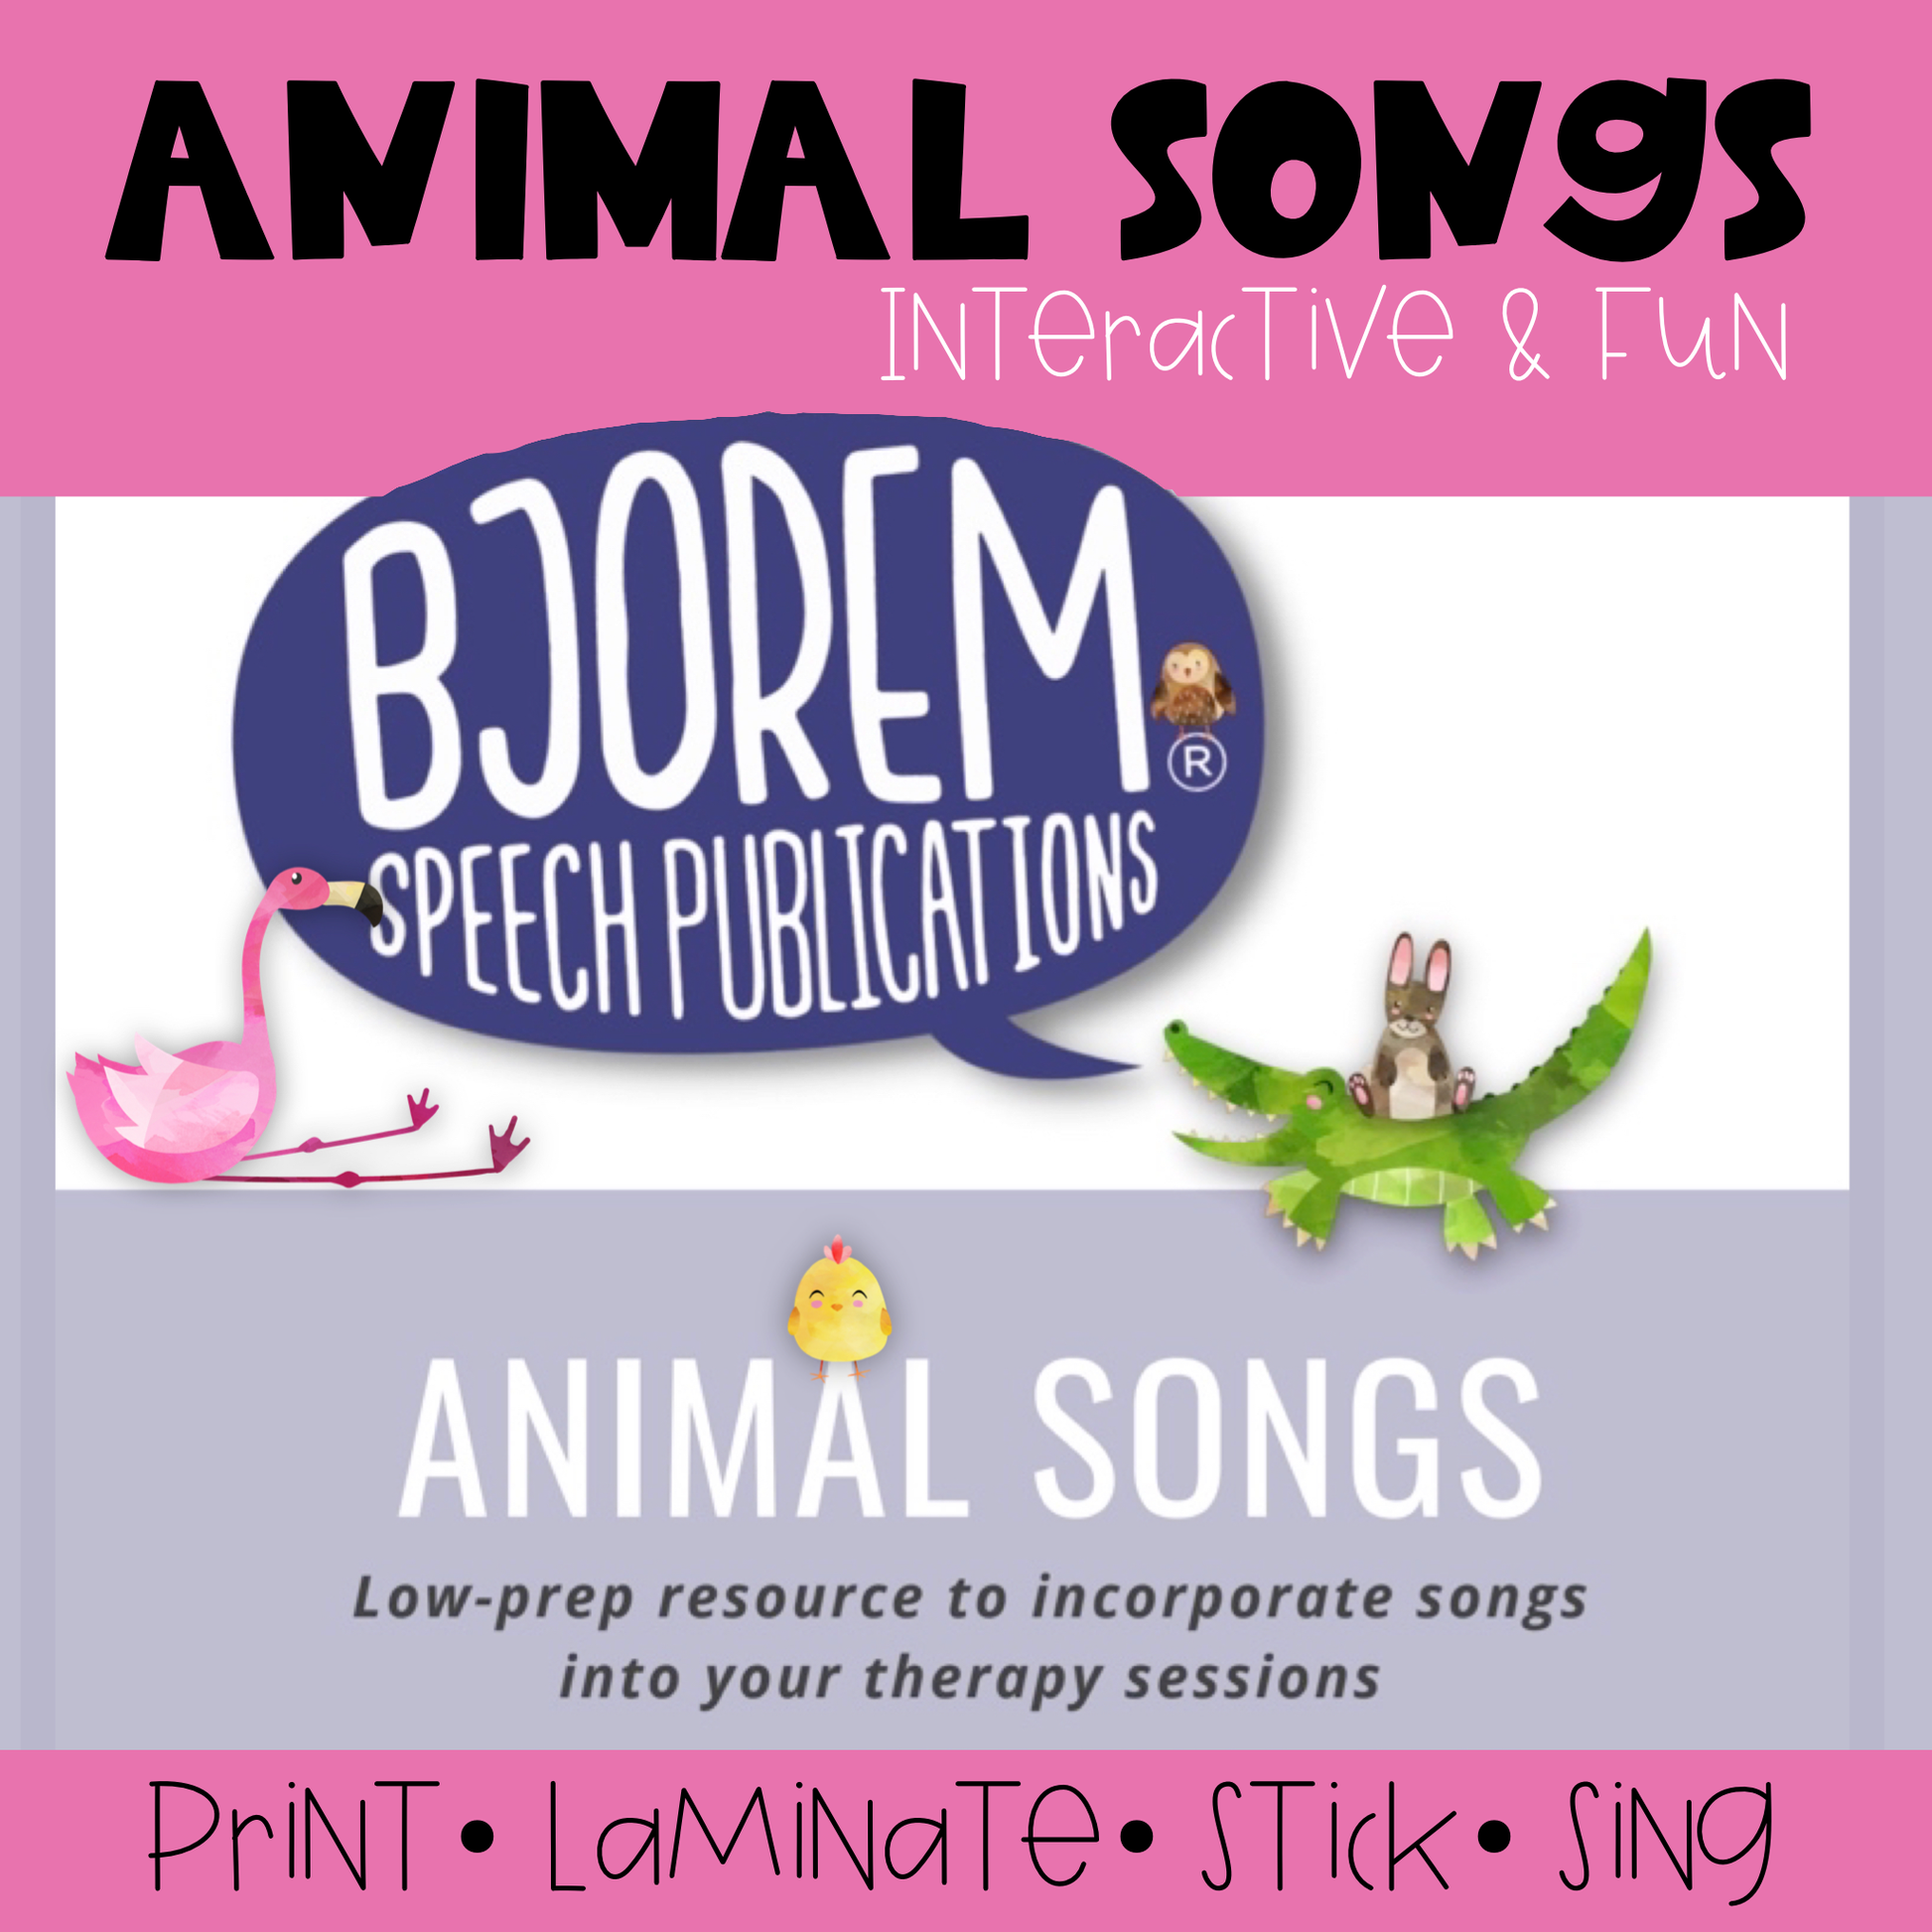 [title]Animal Songs - Download